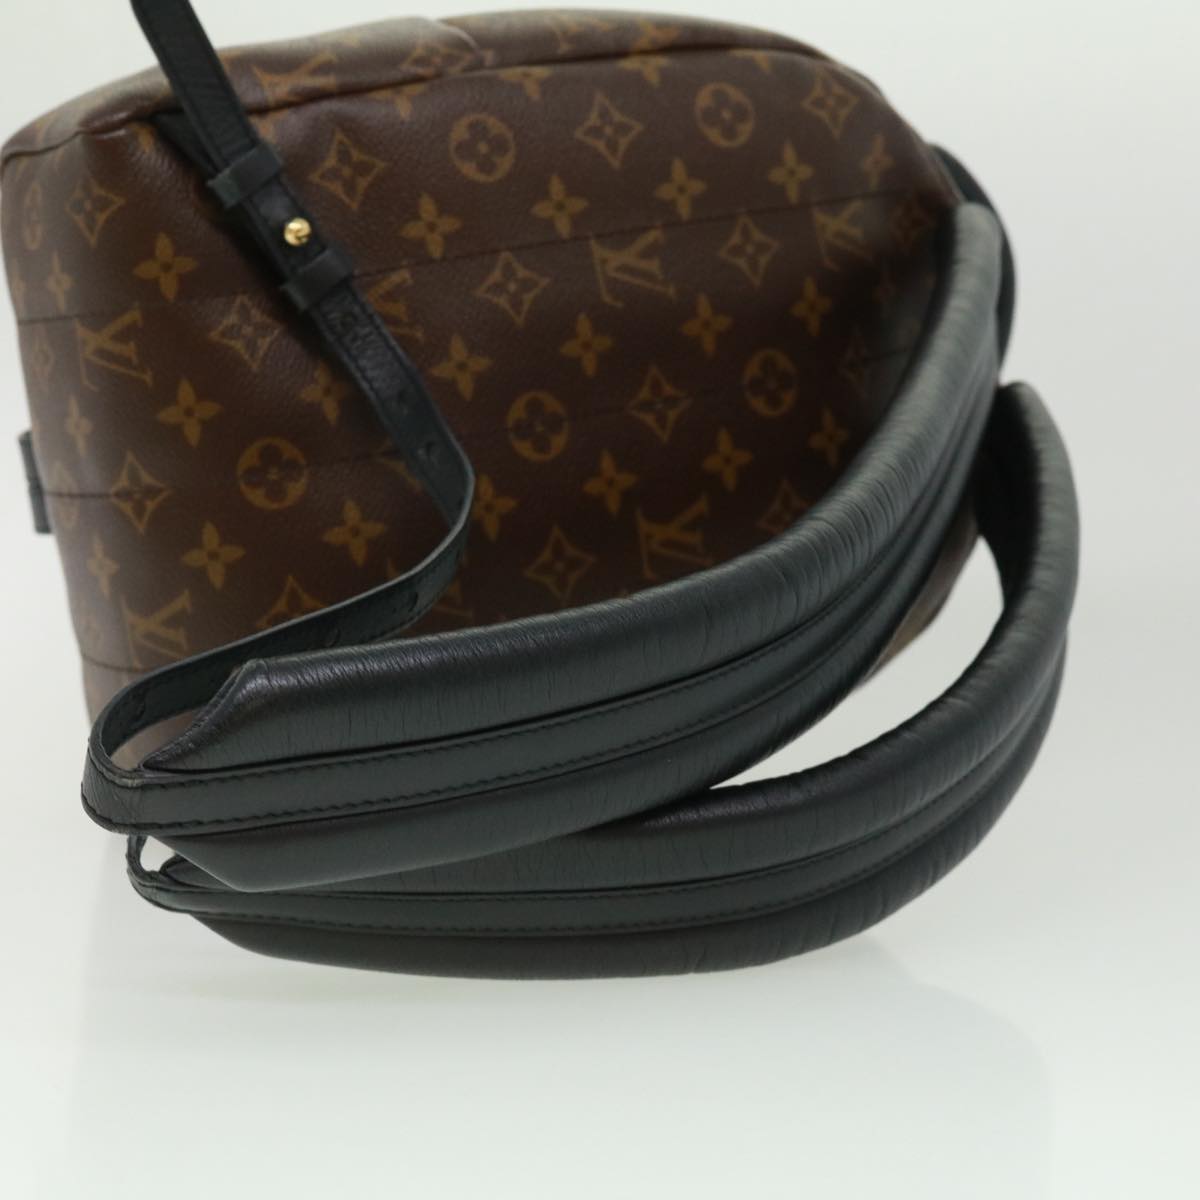 LOUIS VUITTON Monogram Reverse Palm Springs PM Backpack M44870 LV Auth bs2818